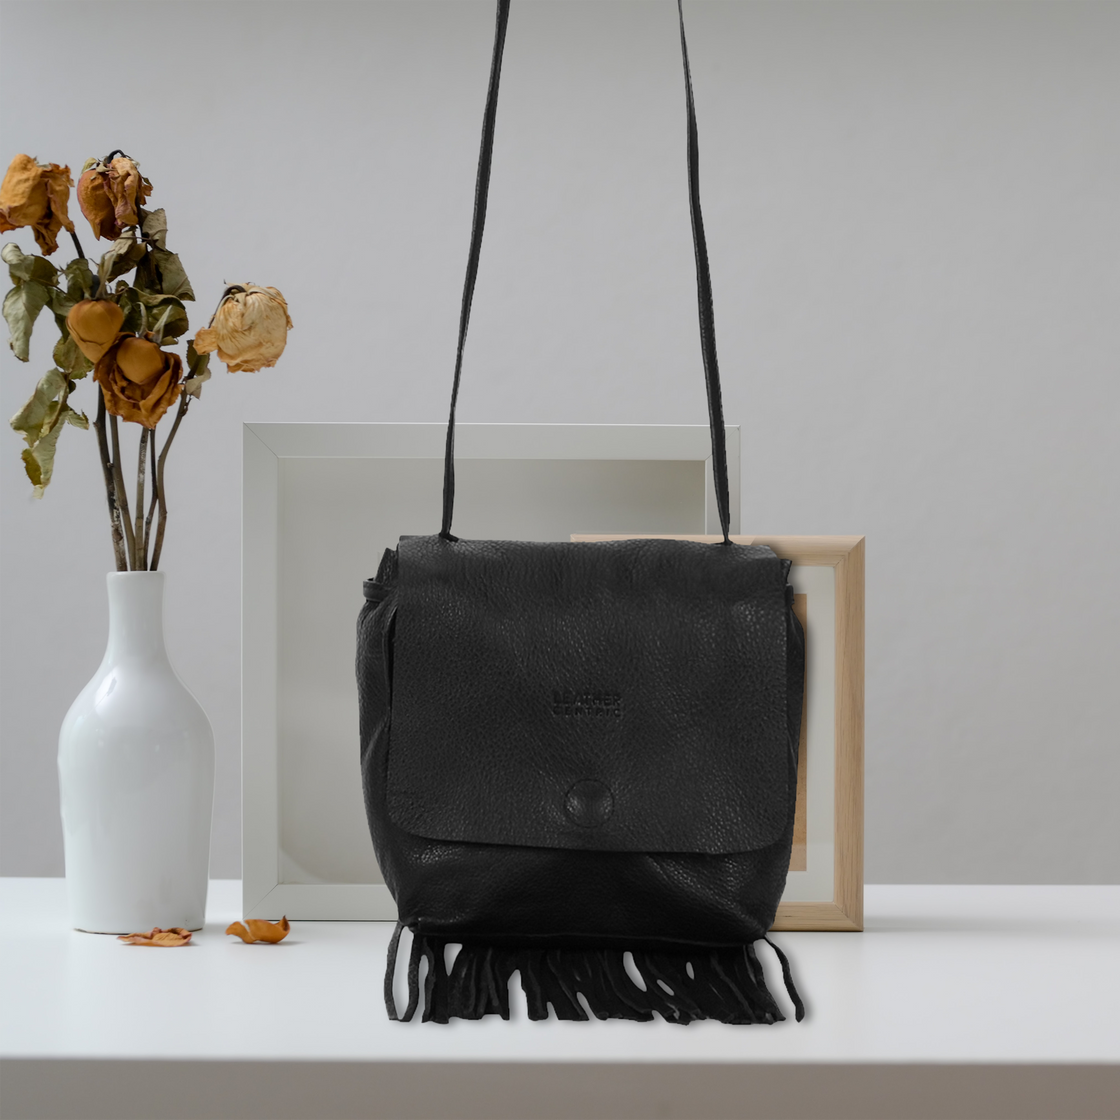 Luxury Designer Leather Tassel Handbag For Women Soho Disco Black Leather  Shoulder Bag With Fringed Messenger Purse, Crossbody Bags, And Wallet  Perfect For Evening Events From Cases888, $22.39 | DHgate.Com